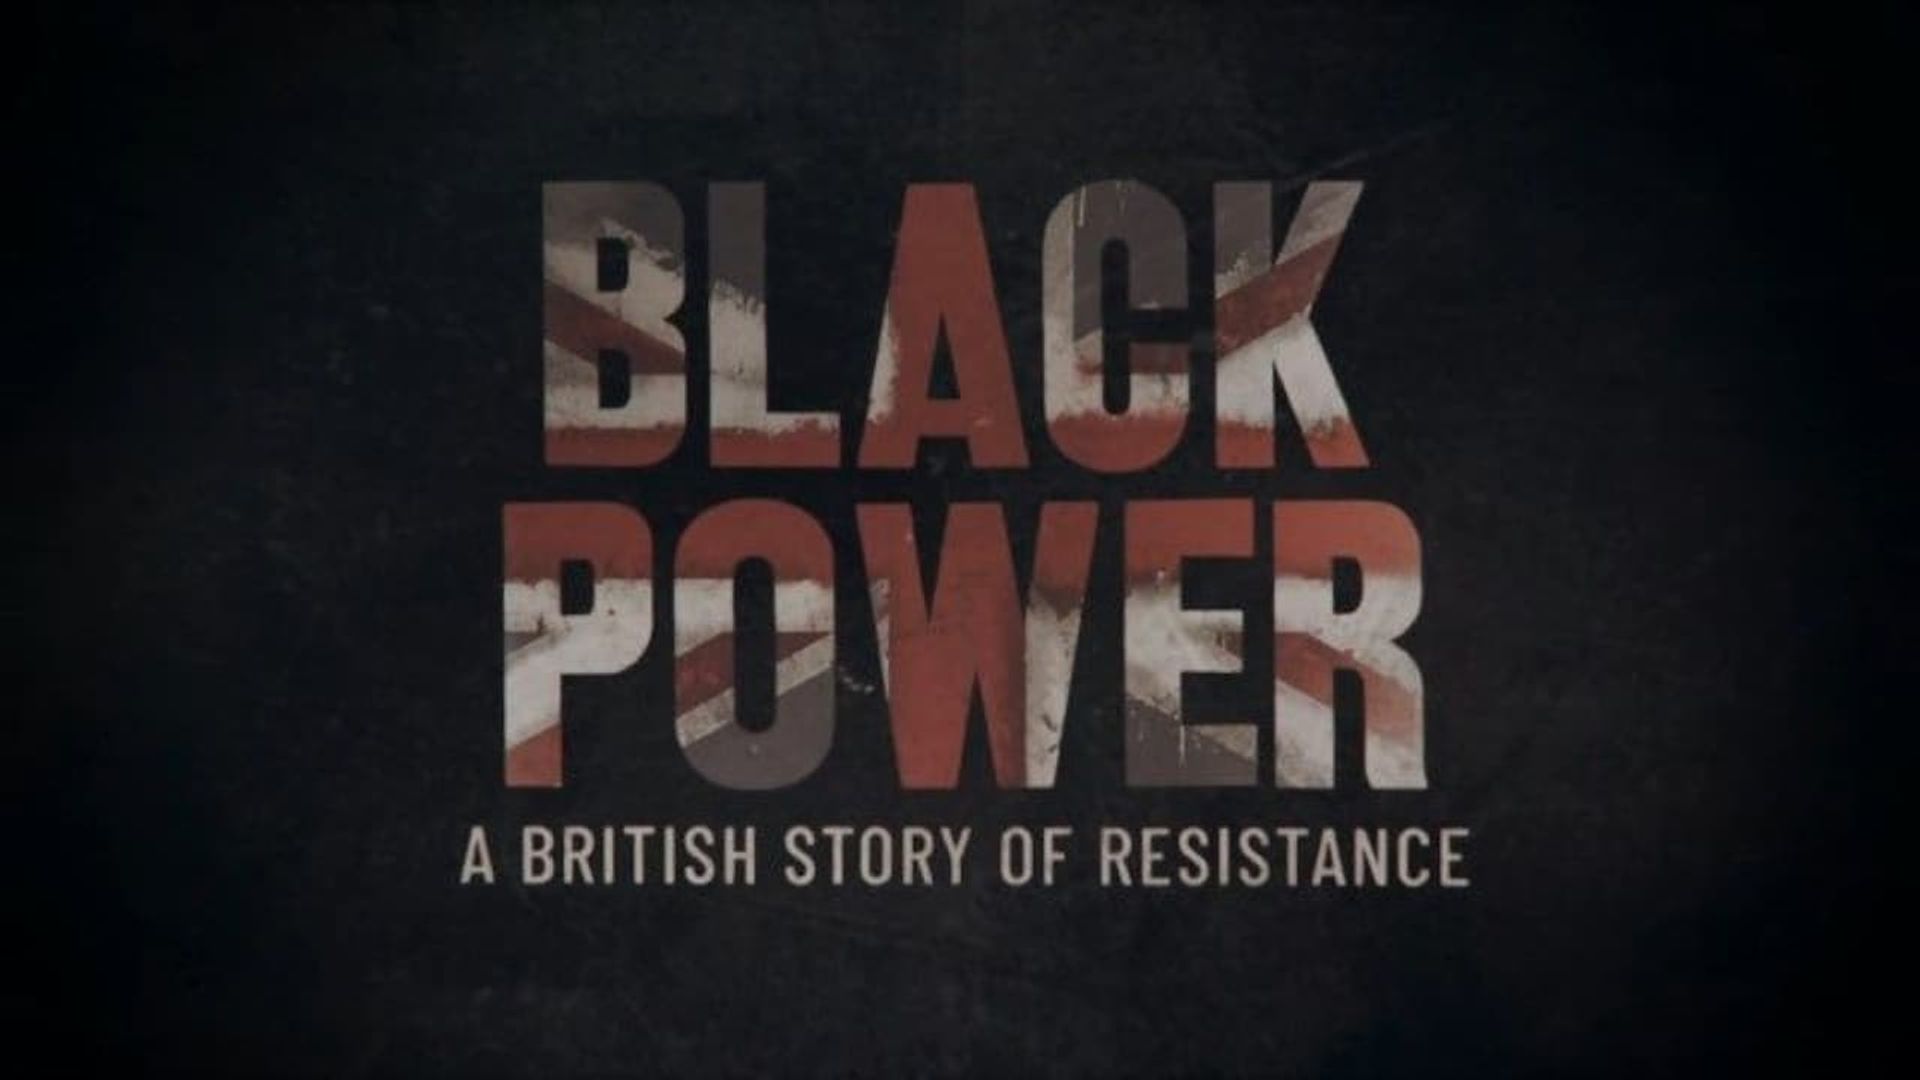 Black Power: A British Story of Resistance background